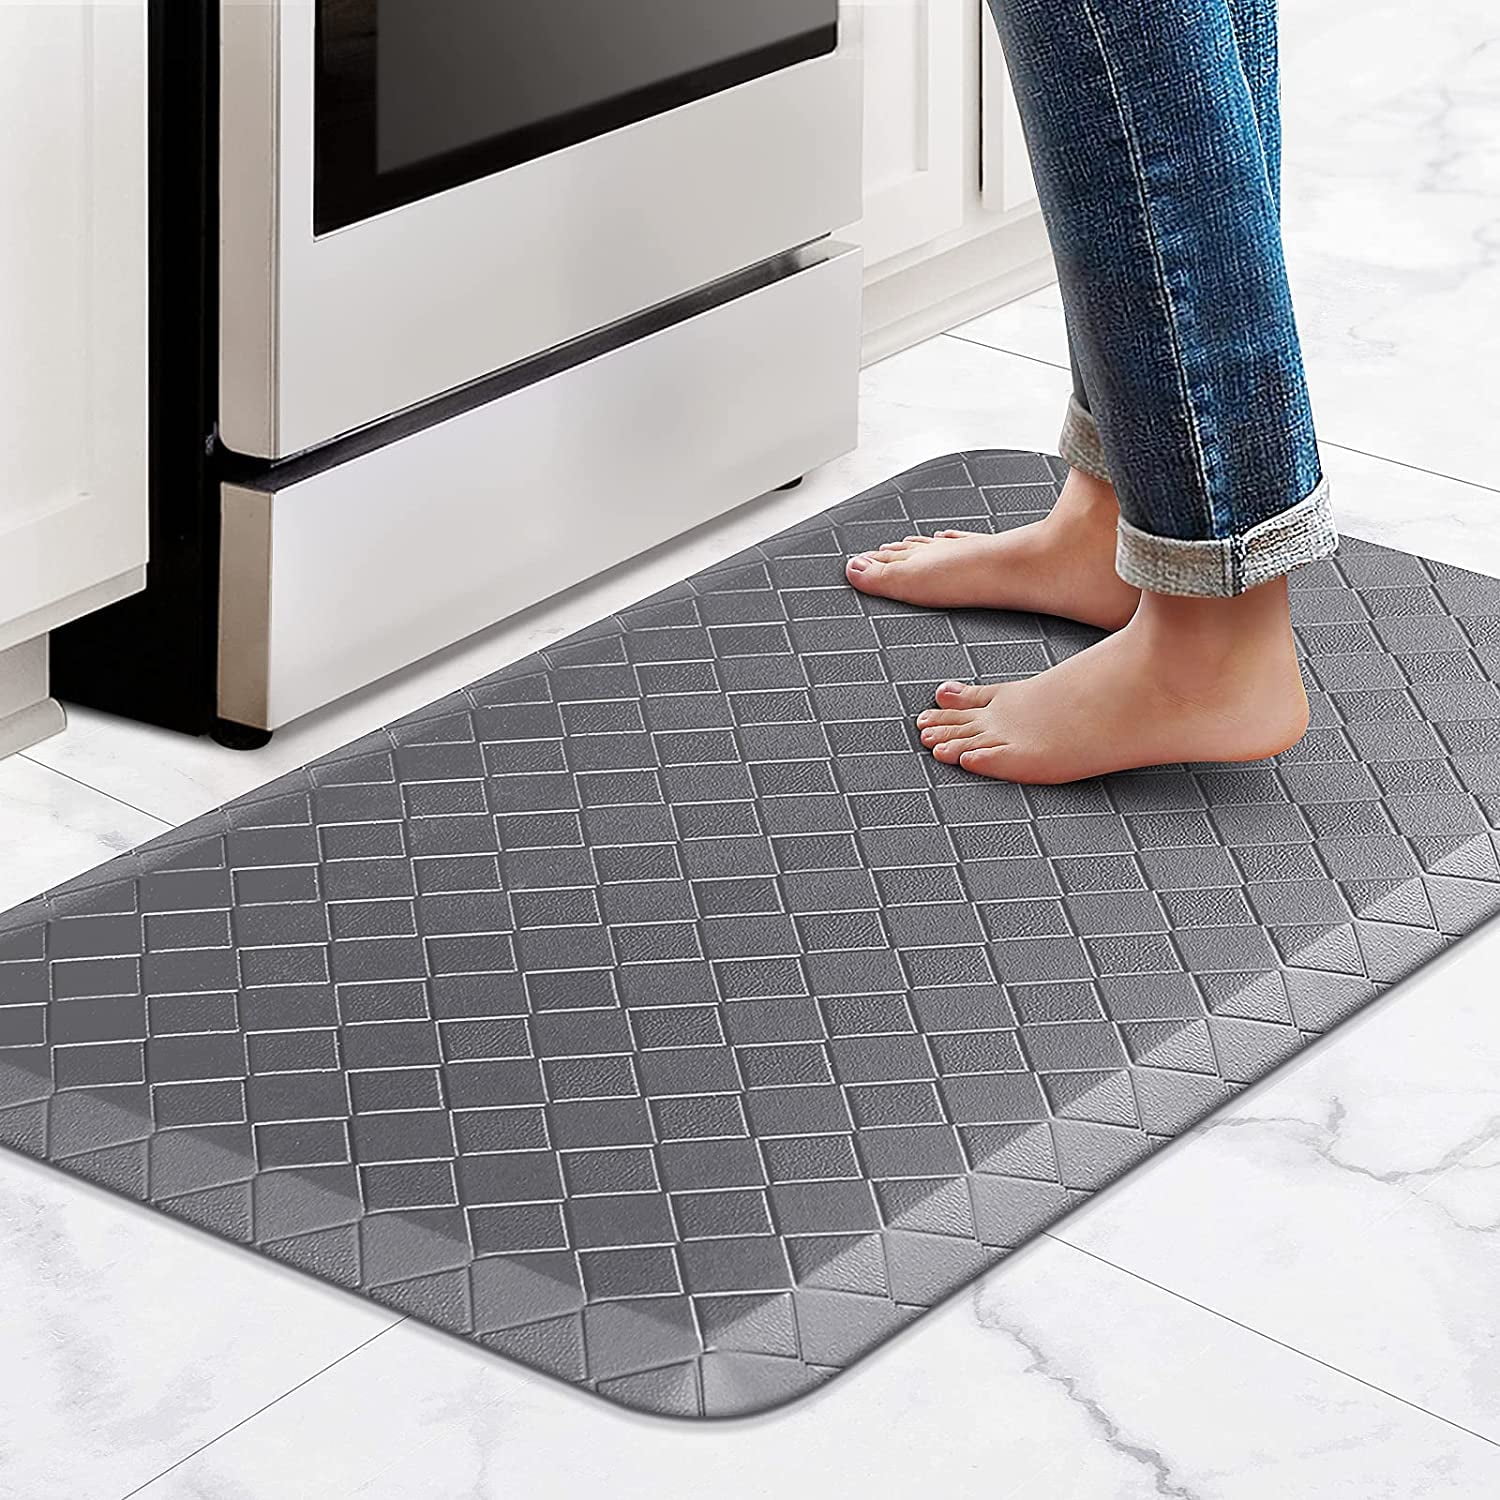 HappyTrends Kitchen Mat Cushioned Anti-Fatigue Kitchen Rug,17.3x 28,Thick  Waterproof Non-Slip Kitchen Mats and Rugs Heavy Duty Ergonomic Comfort Rug